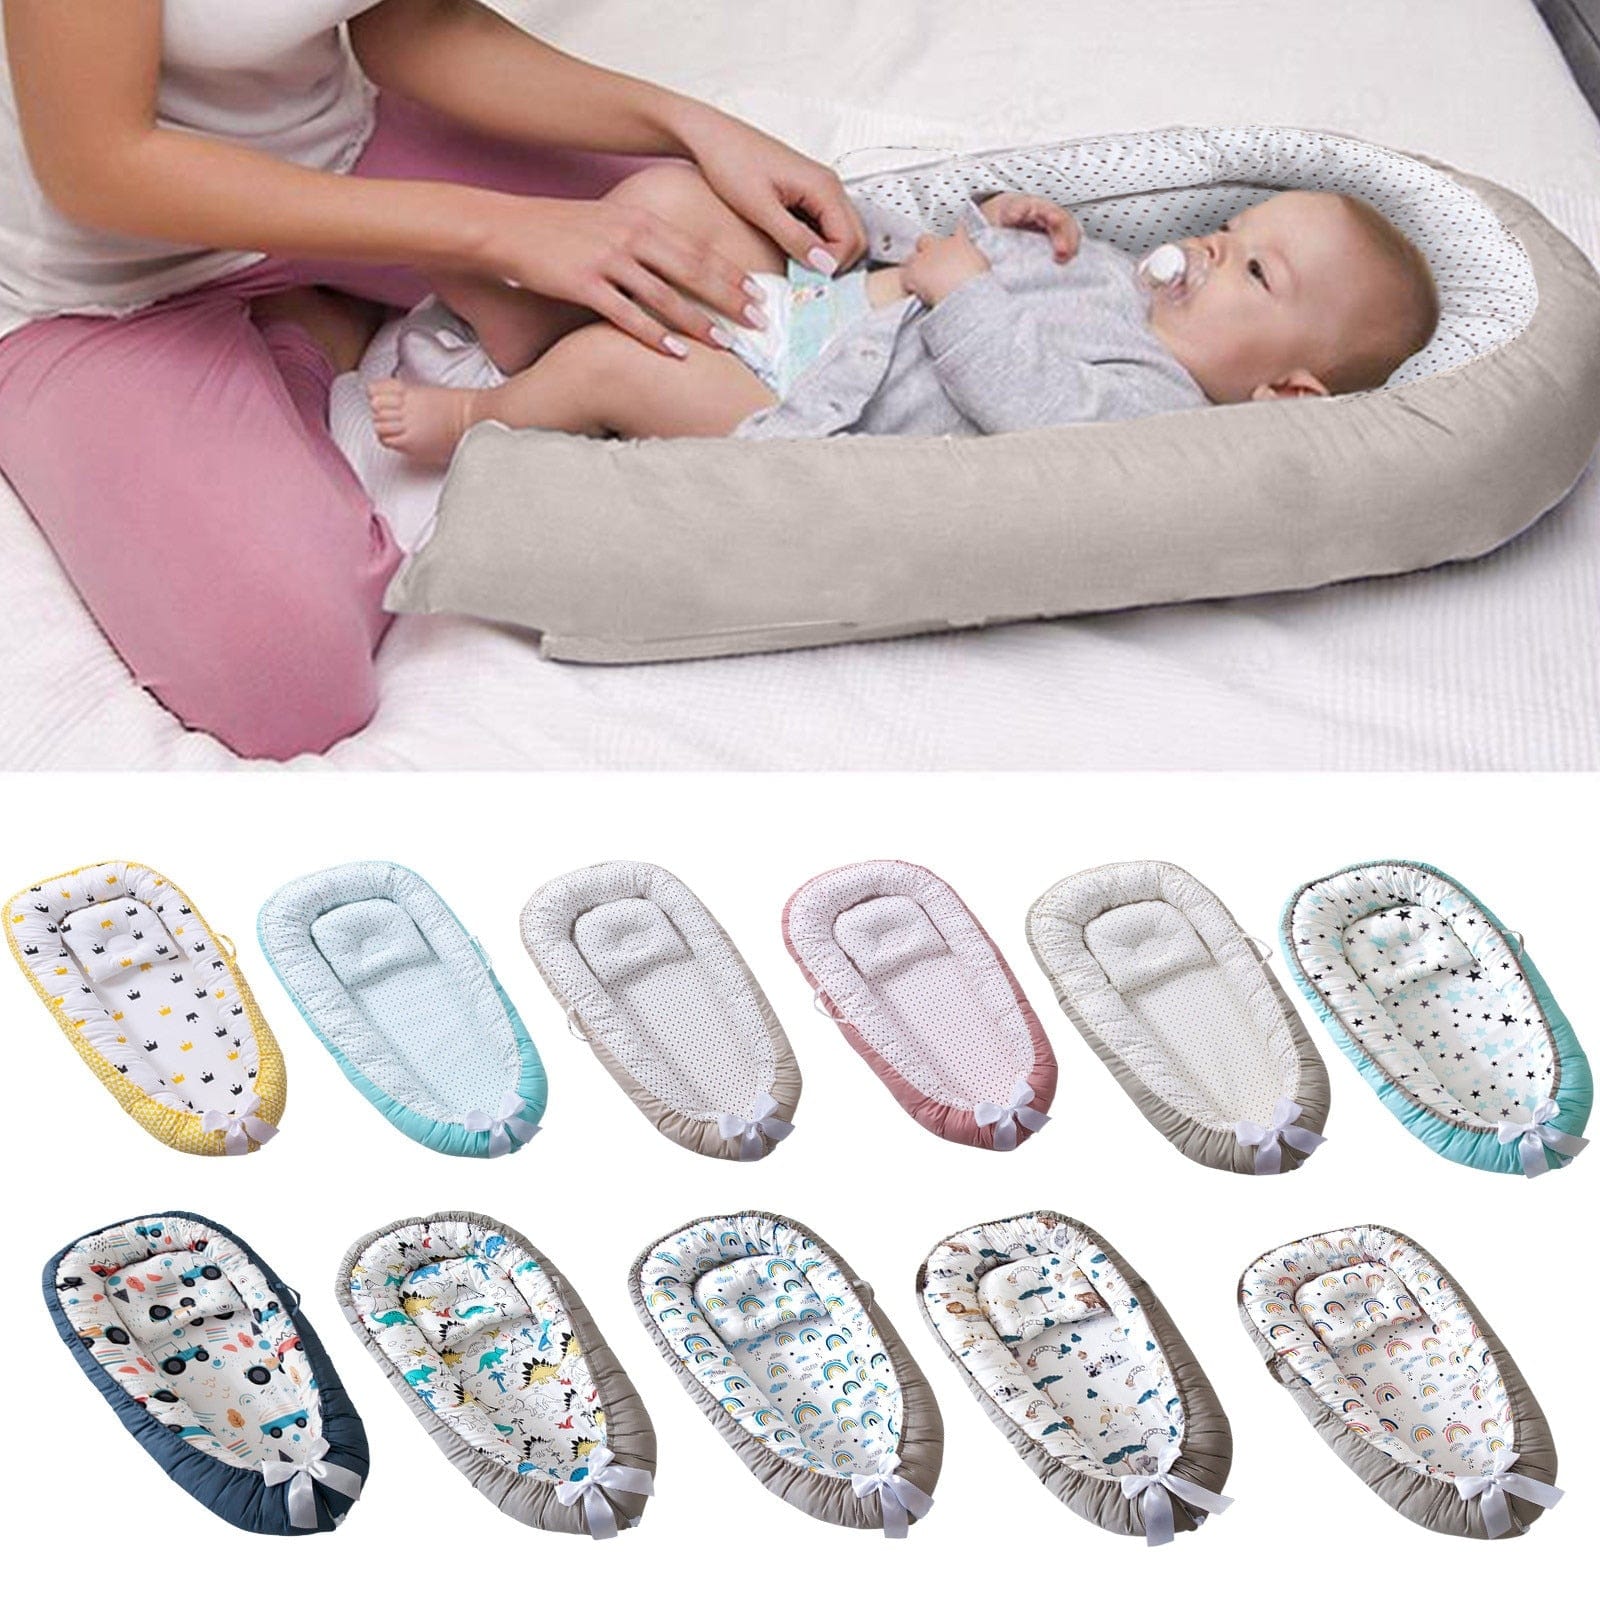 Proactive Baby Cribs & Toddler Beds ProactiveBaby Cozy Portable Baby Nest Bed